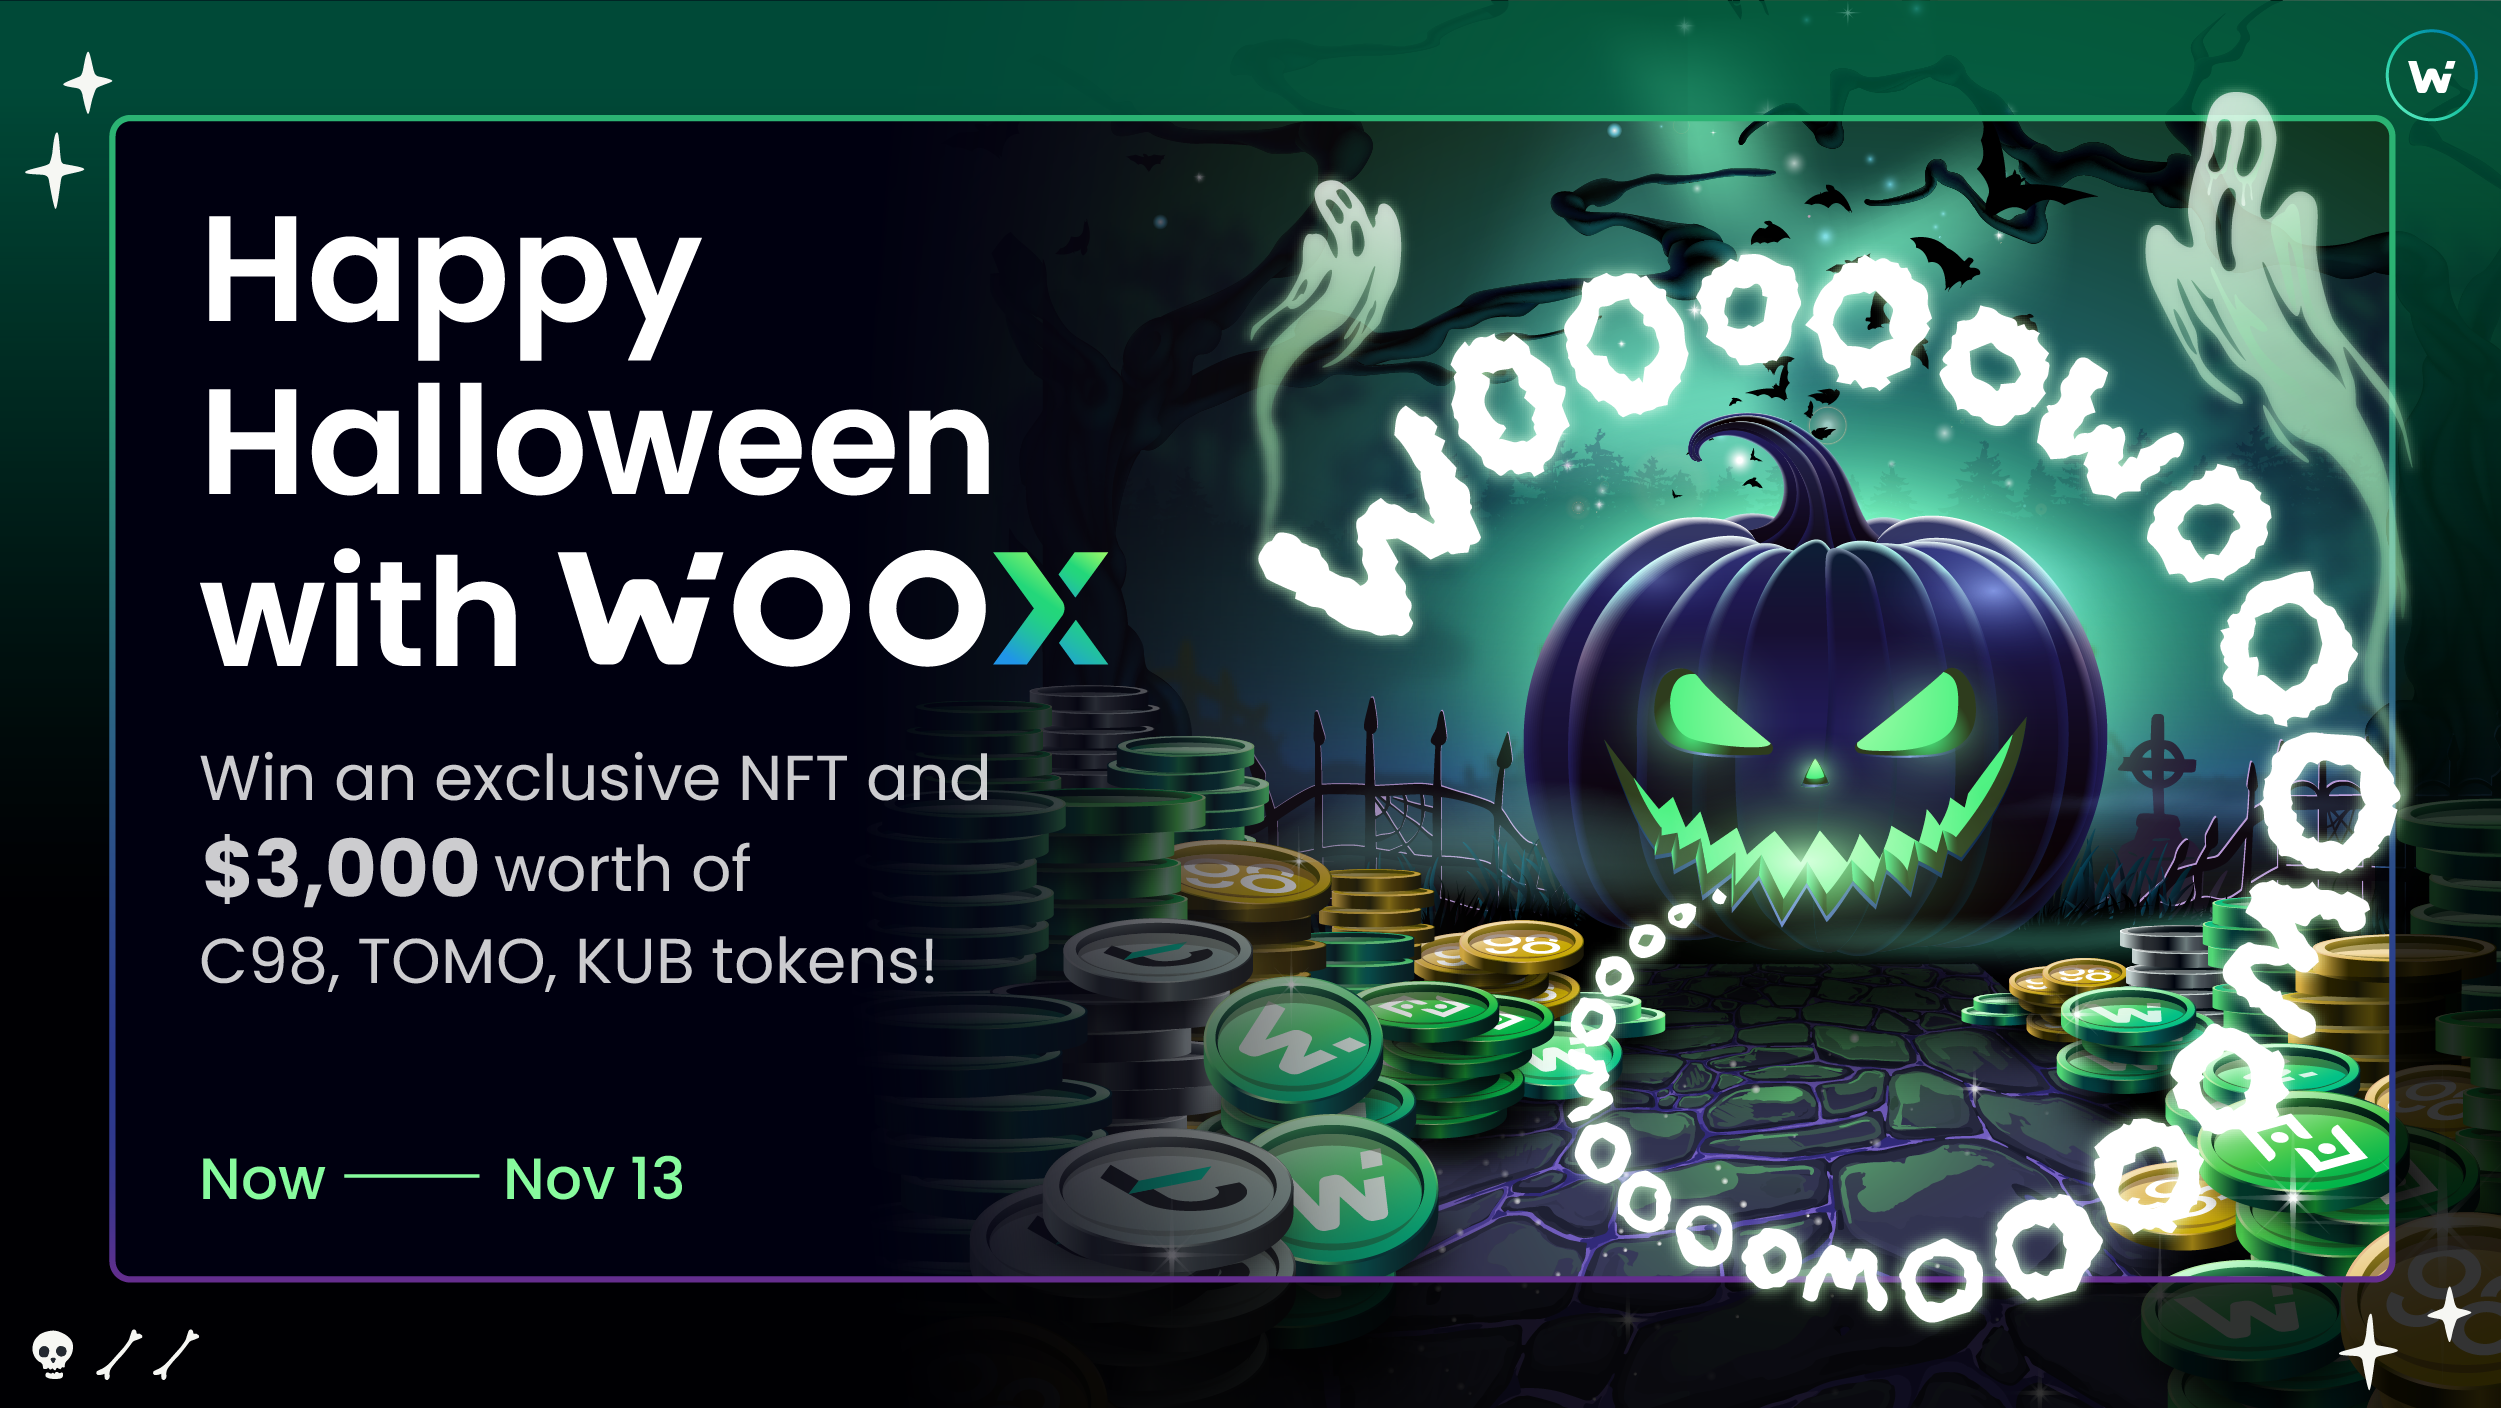 Celebrate Halloween with WOO X to win an Exclusive NFT and Tokens